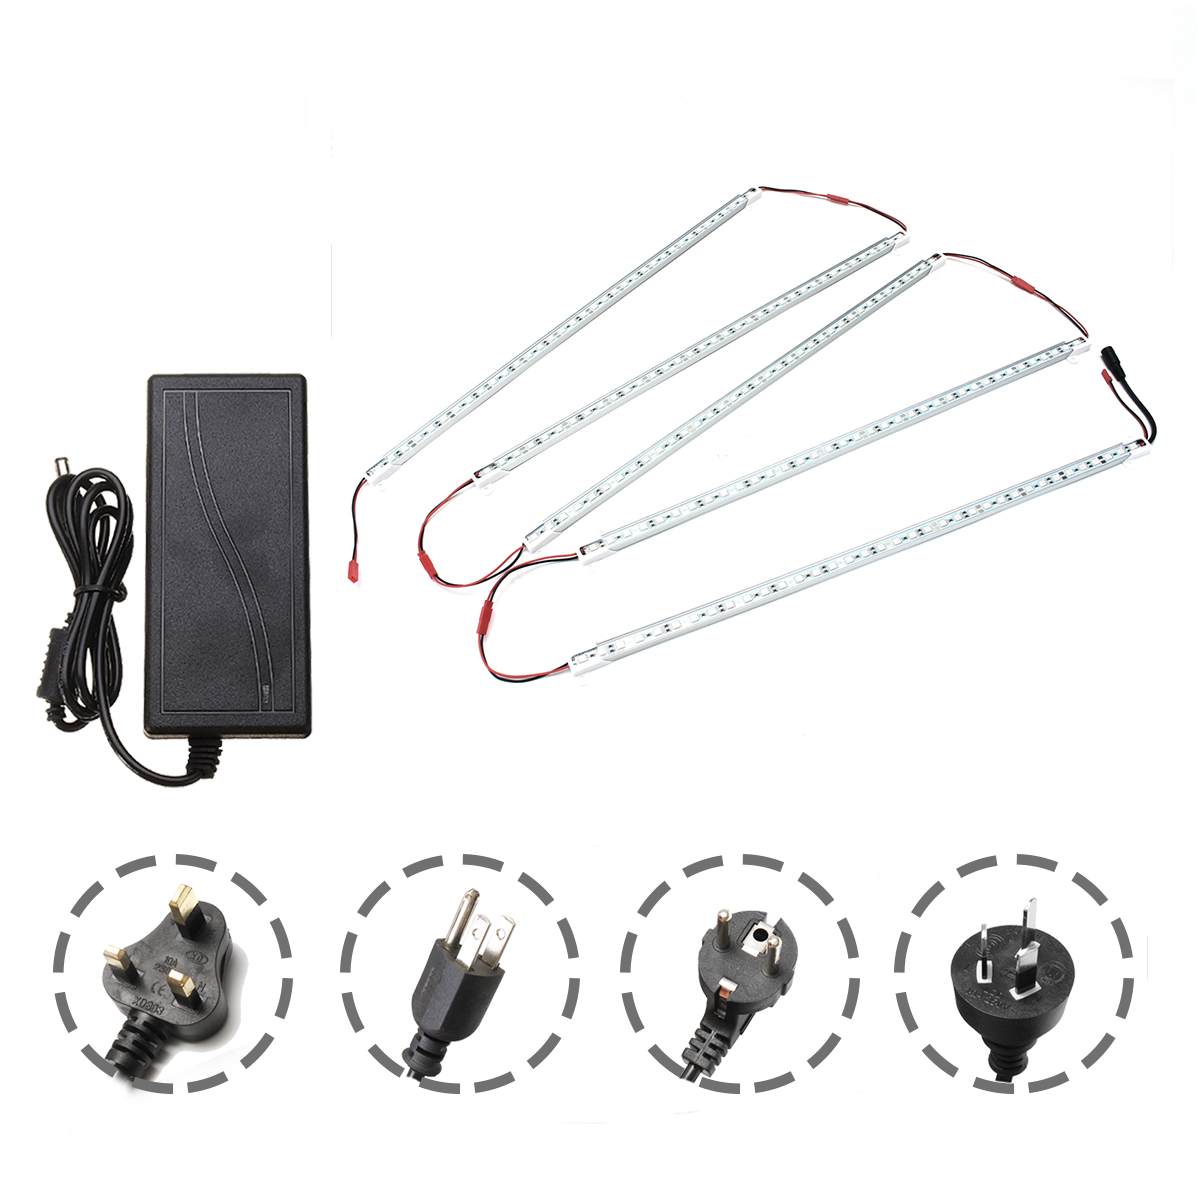 5PCS-50CM-SMD5050-Non-waterproof-51-LED-Strip-Light--5A-Power-Adapter-for-Grow-Plant-Garden-DC12V-1285504-1